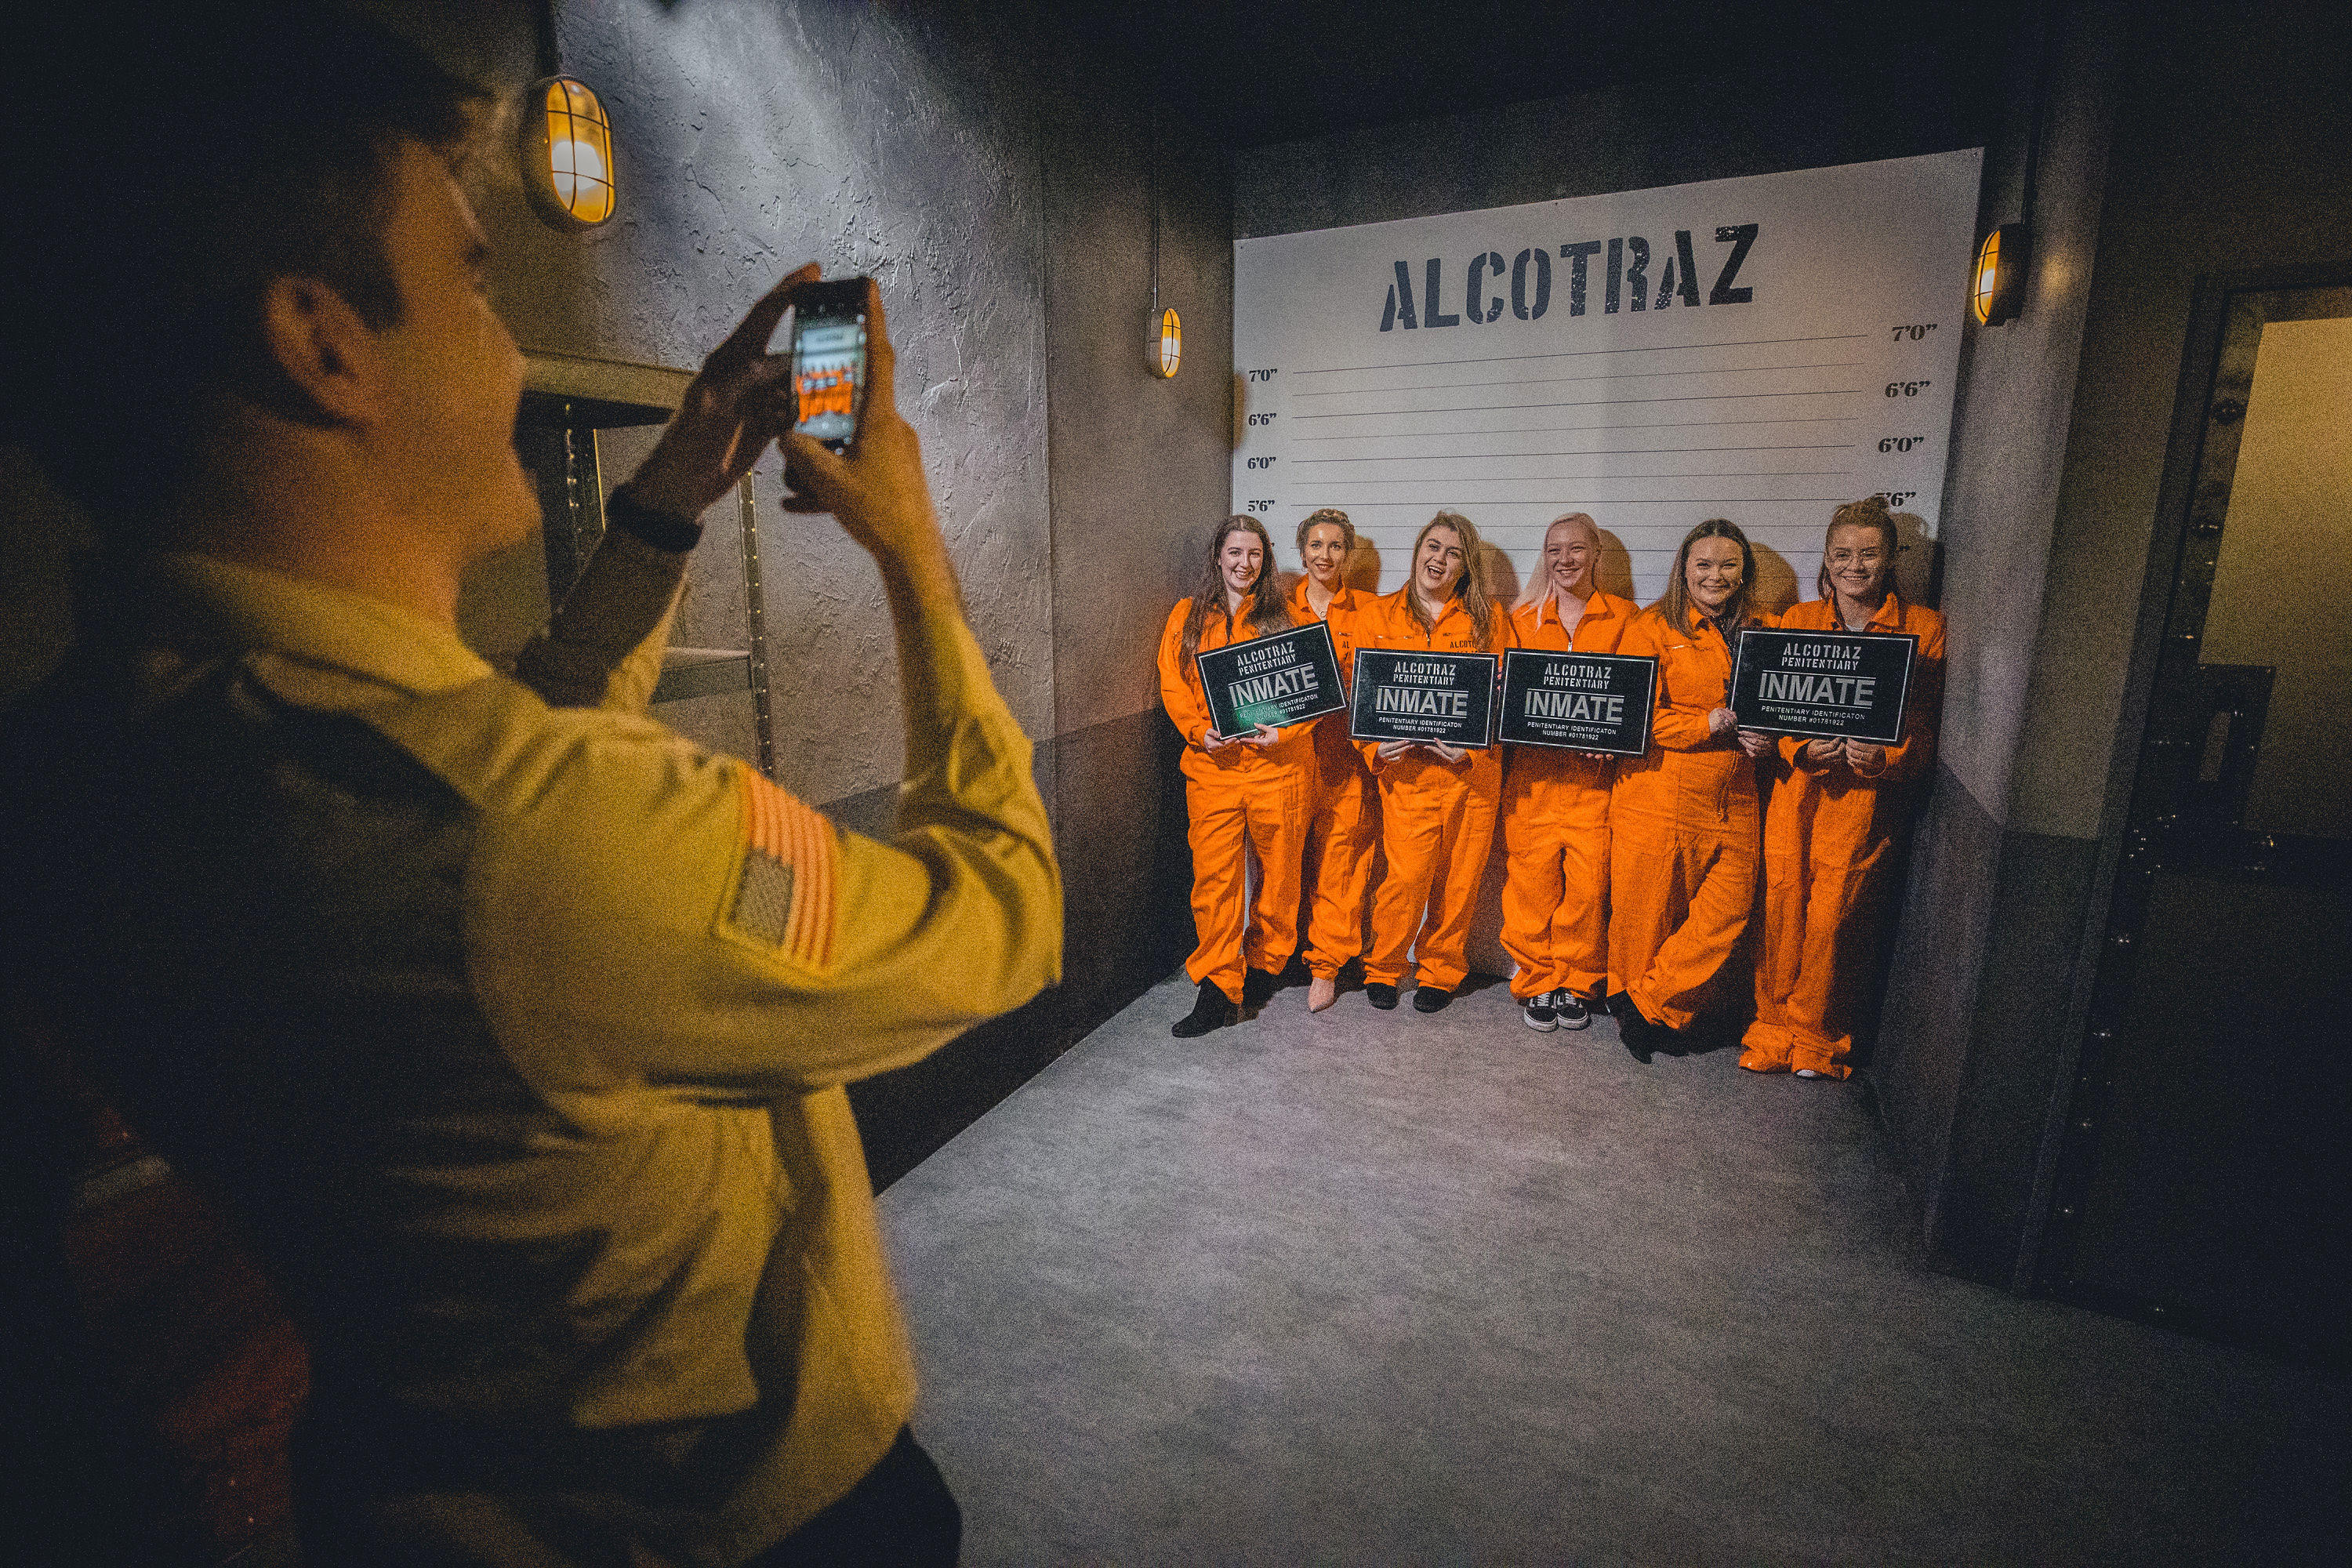 Images Alcotraz Liverpool: Cell Block Three-Six